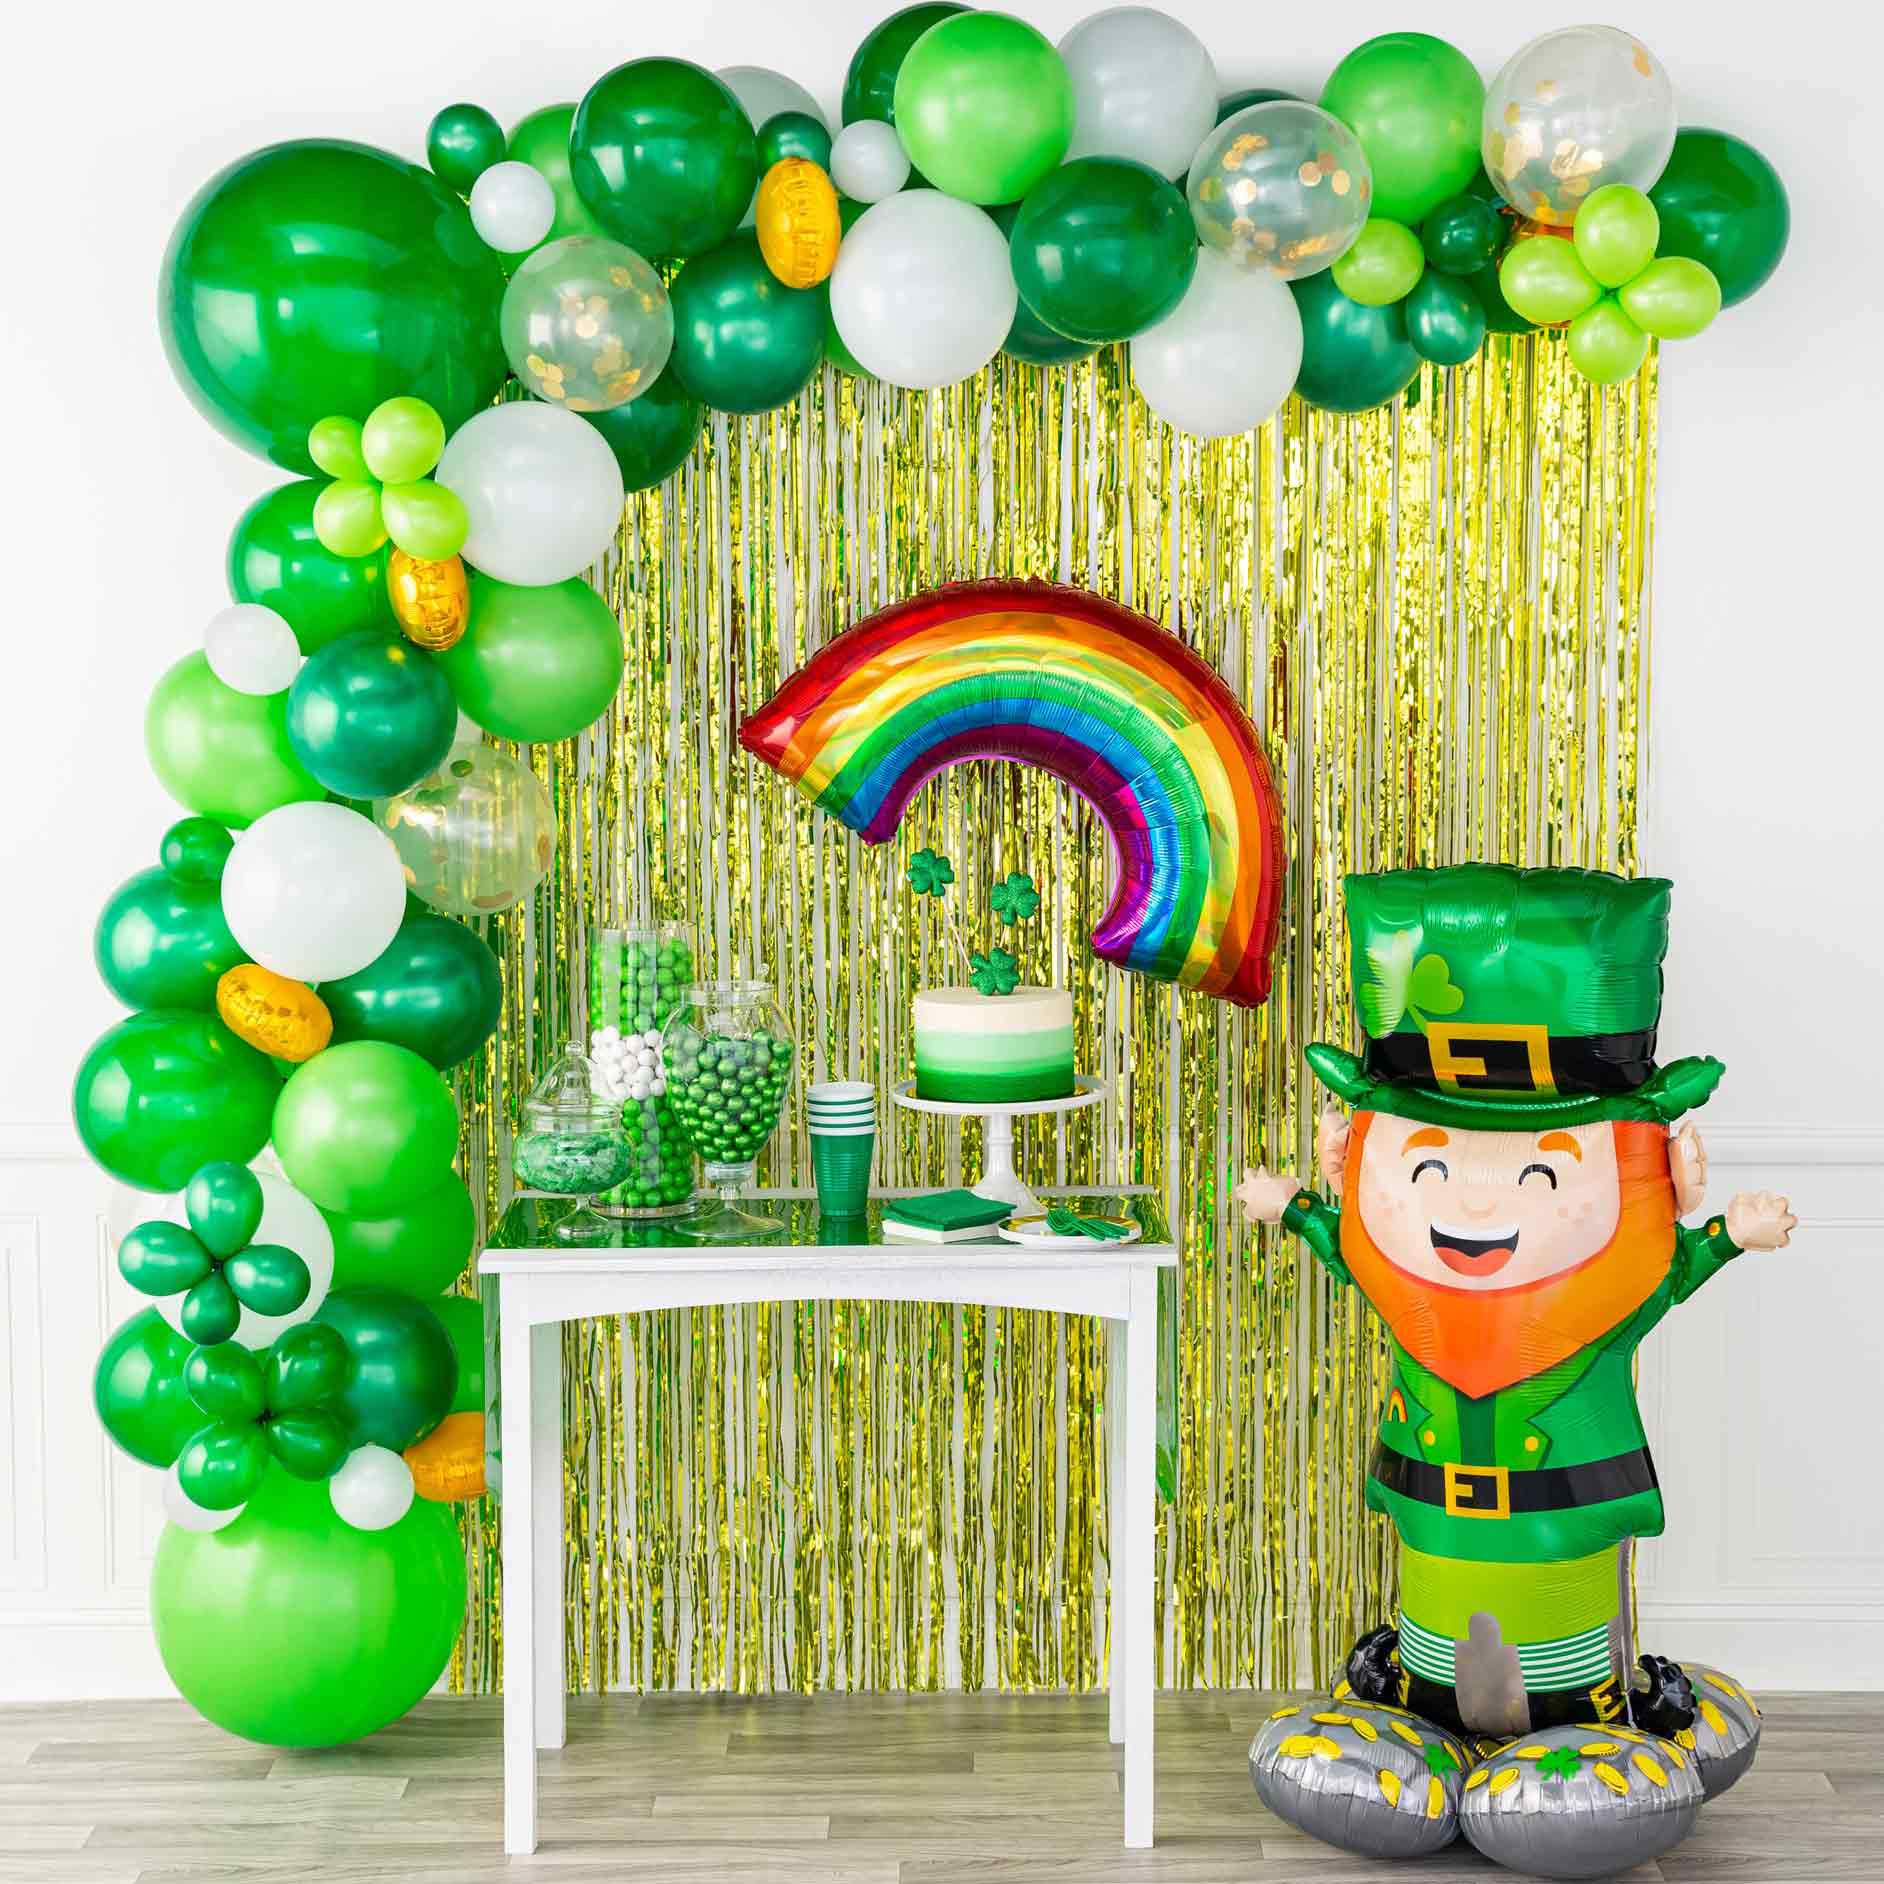 st patricks balloons with rainbows and leprechauns 